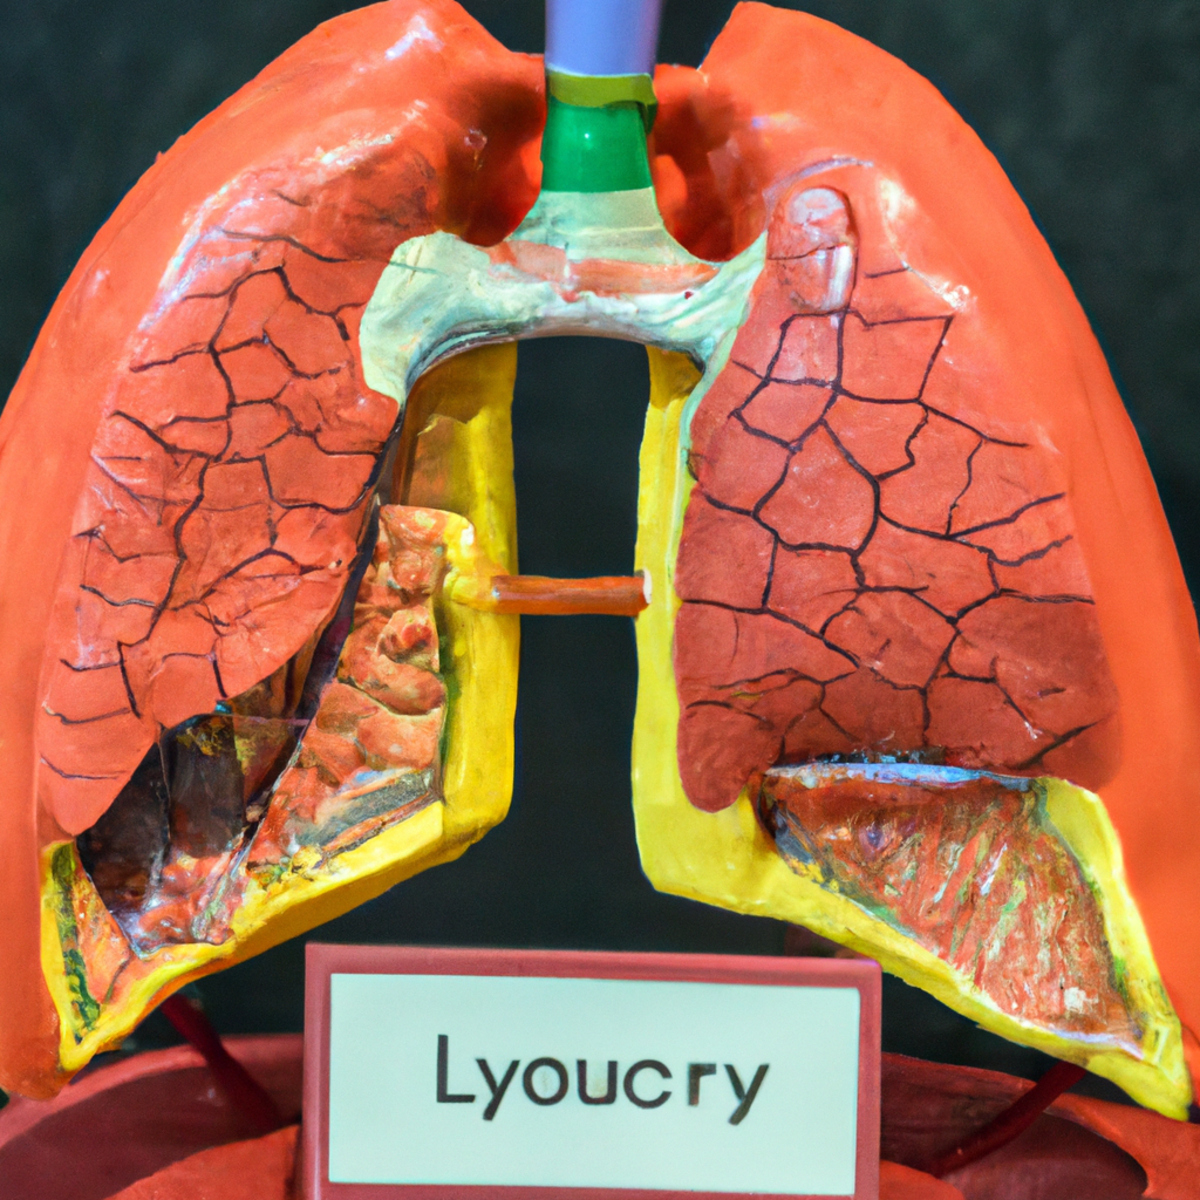 Detailed human lung model, magnified cilia image, and medical equipment -Primary Ciliary Dyskinesia (PCD)